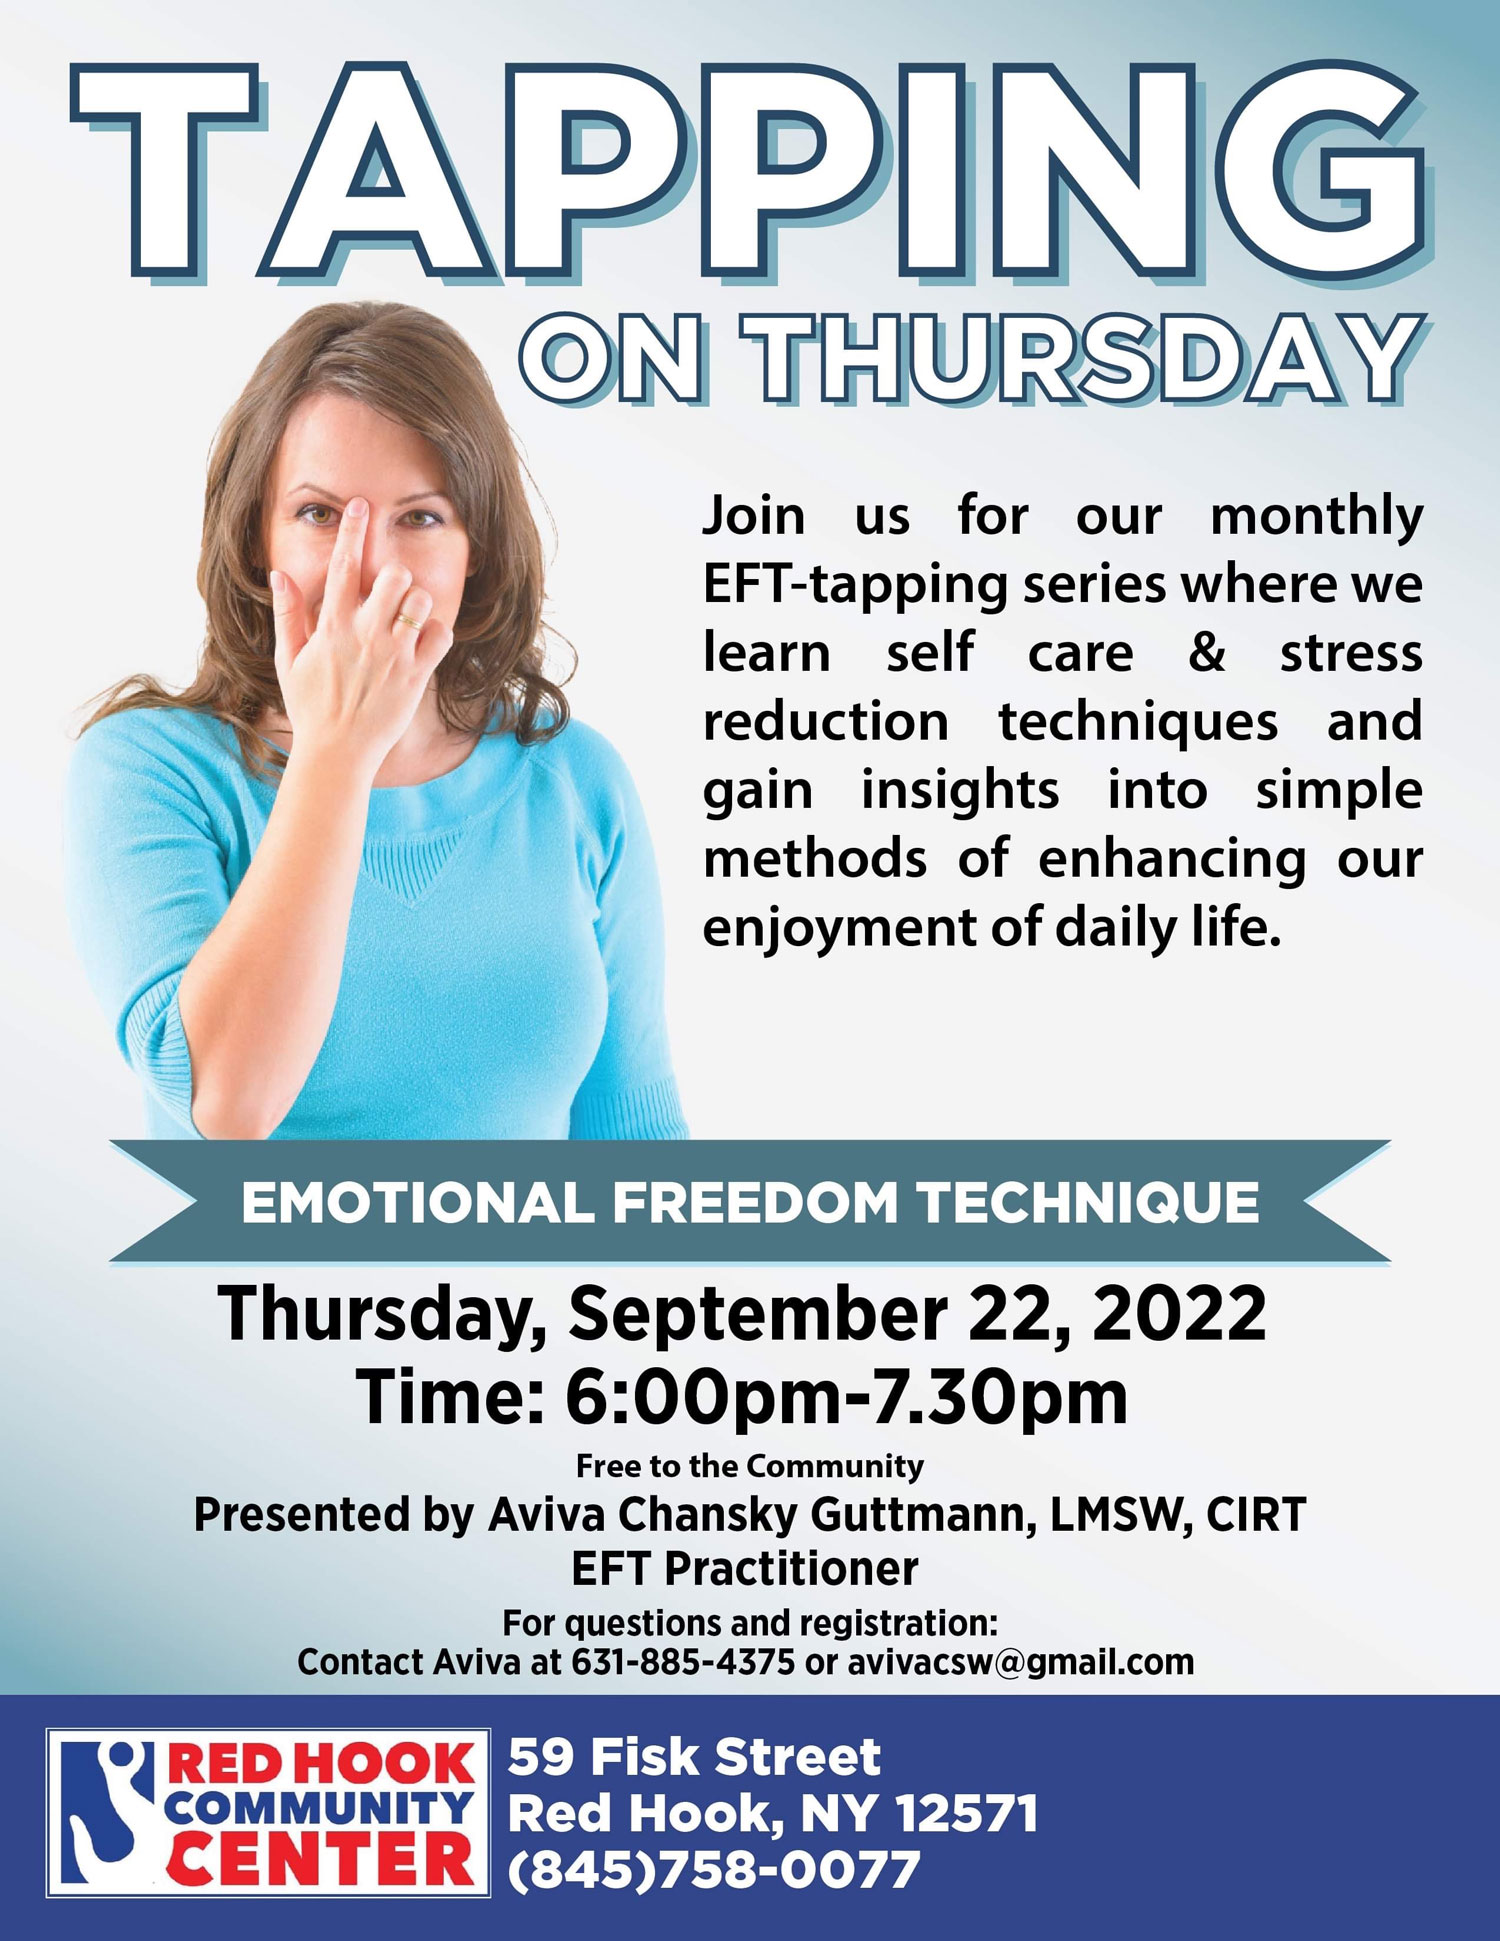 Tapping on Thursday: Join us for our monthly EFT-Tapping series where we learn self care & stress reduction techniques and gain insights into simple methods of enhancing our enjoyment of daily life on Thursday, September 22, 2022 @ 6pm-7:30pm Open to the community and presented by Aviva Chansky Guttmann, LMSW, CIRT, EFT Practitioner.